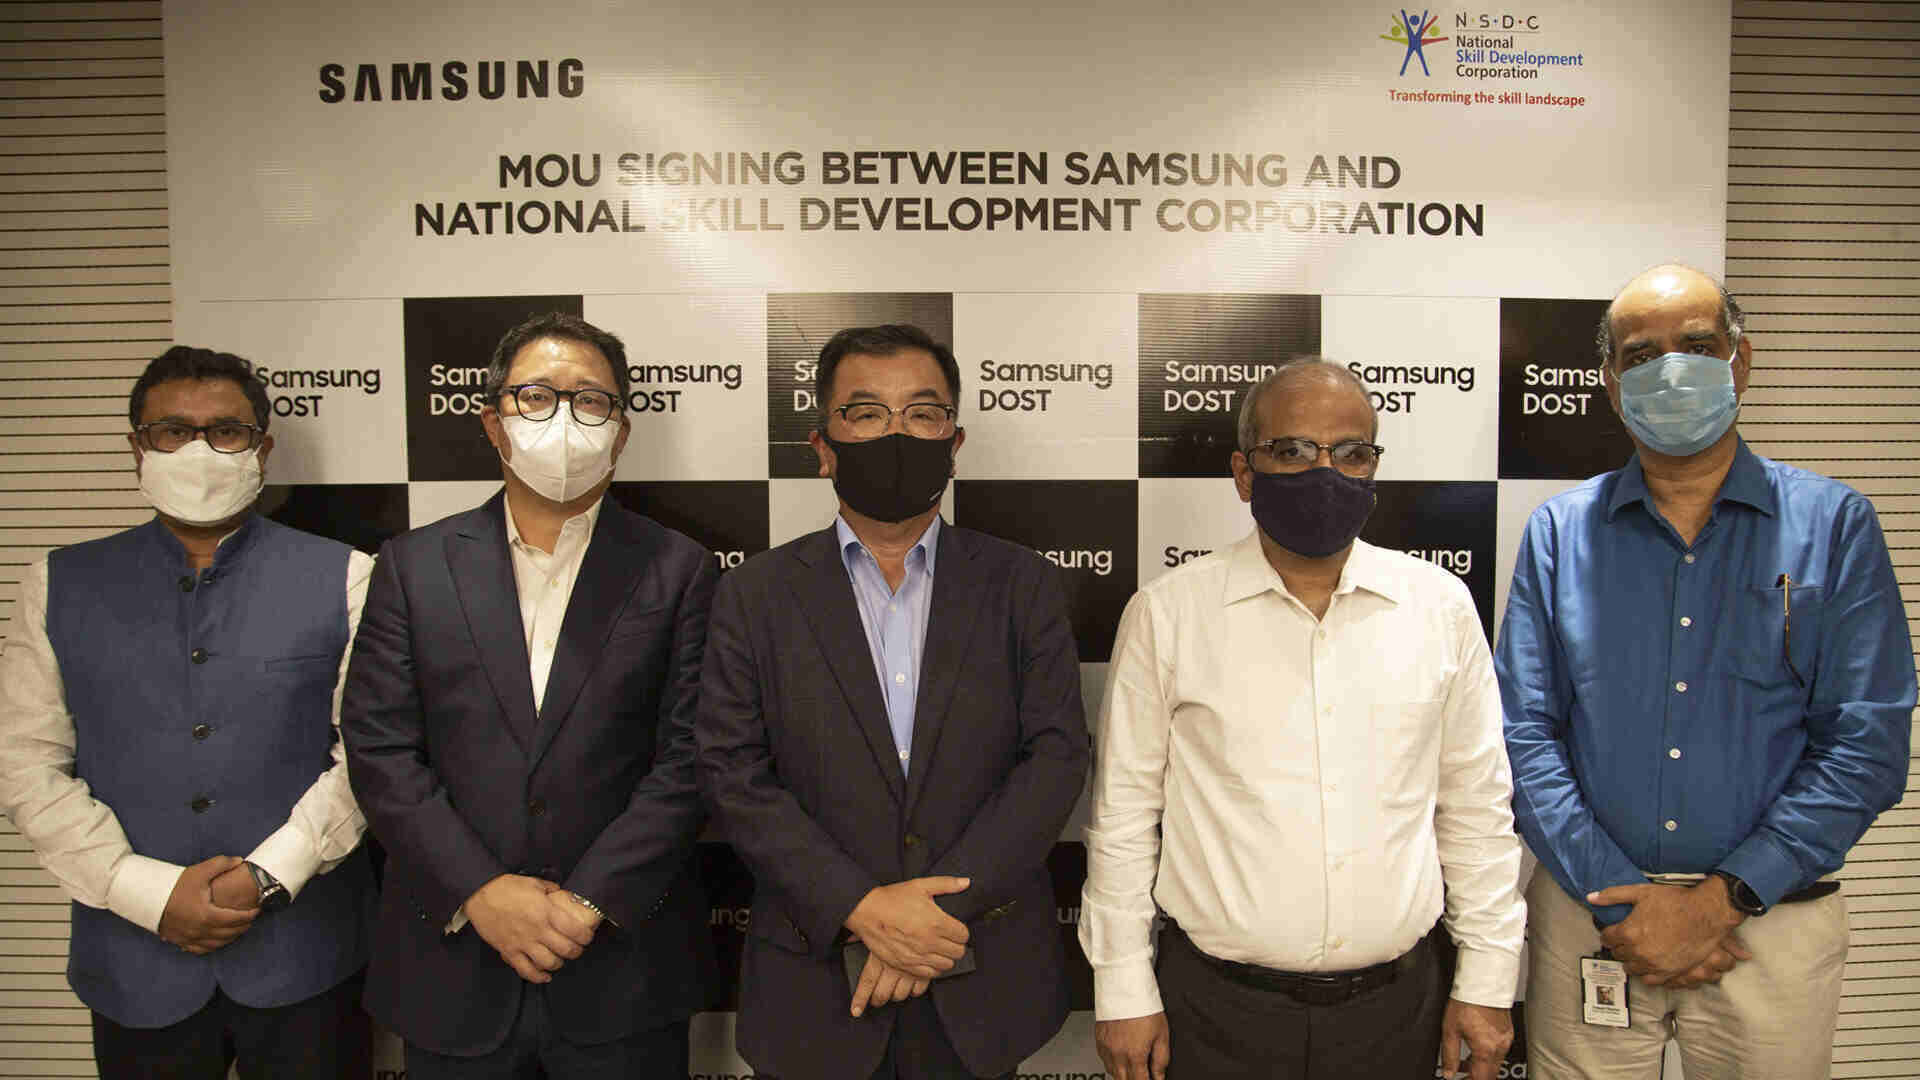 Samsung collaborates with NSDC